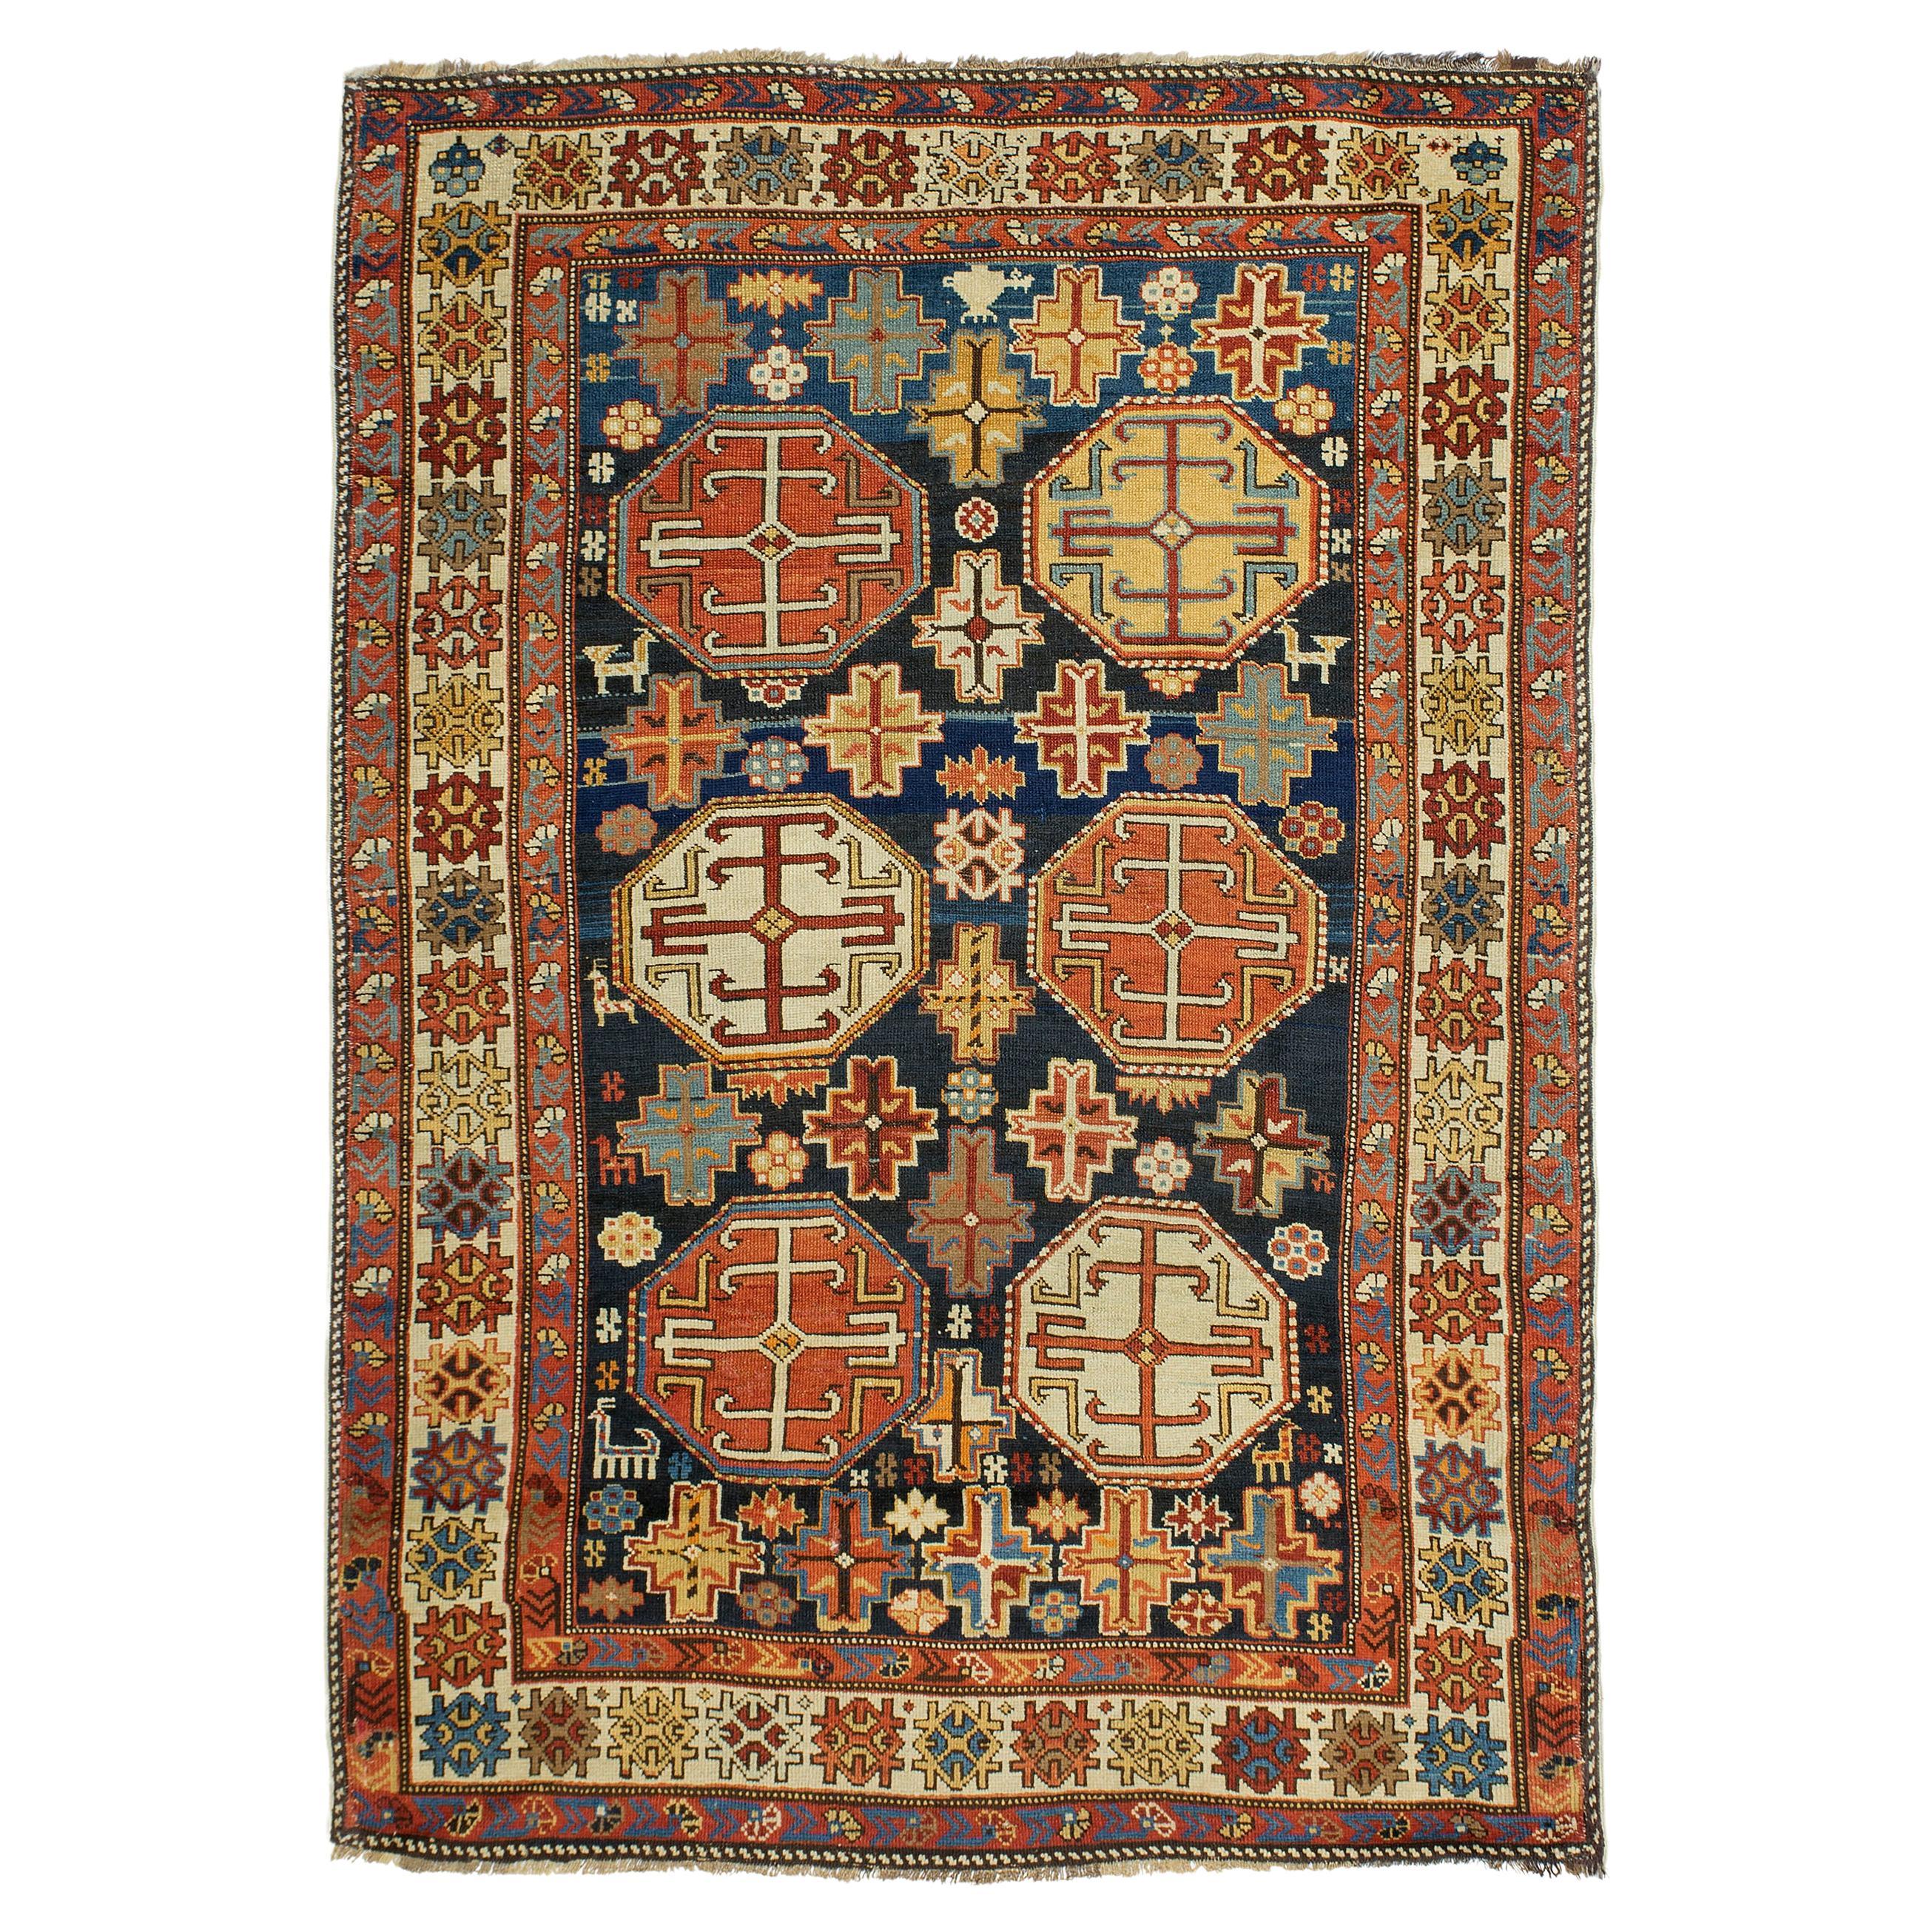 Armenian Rugs and Carpets